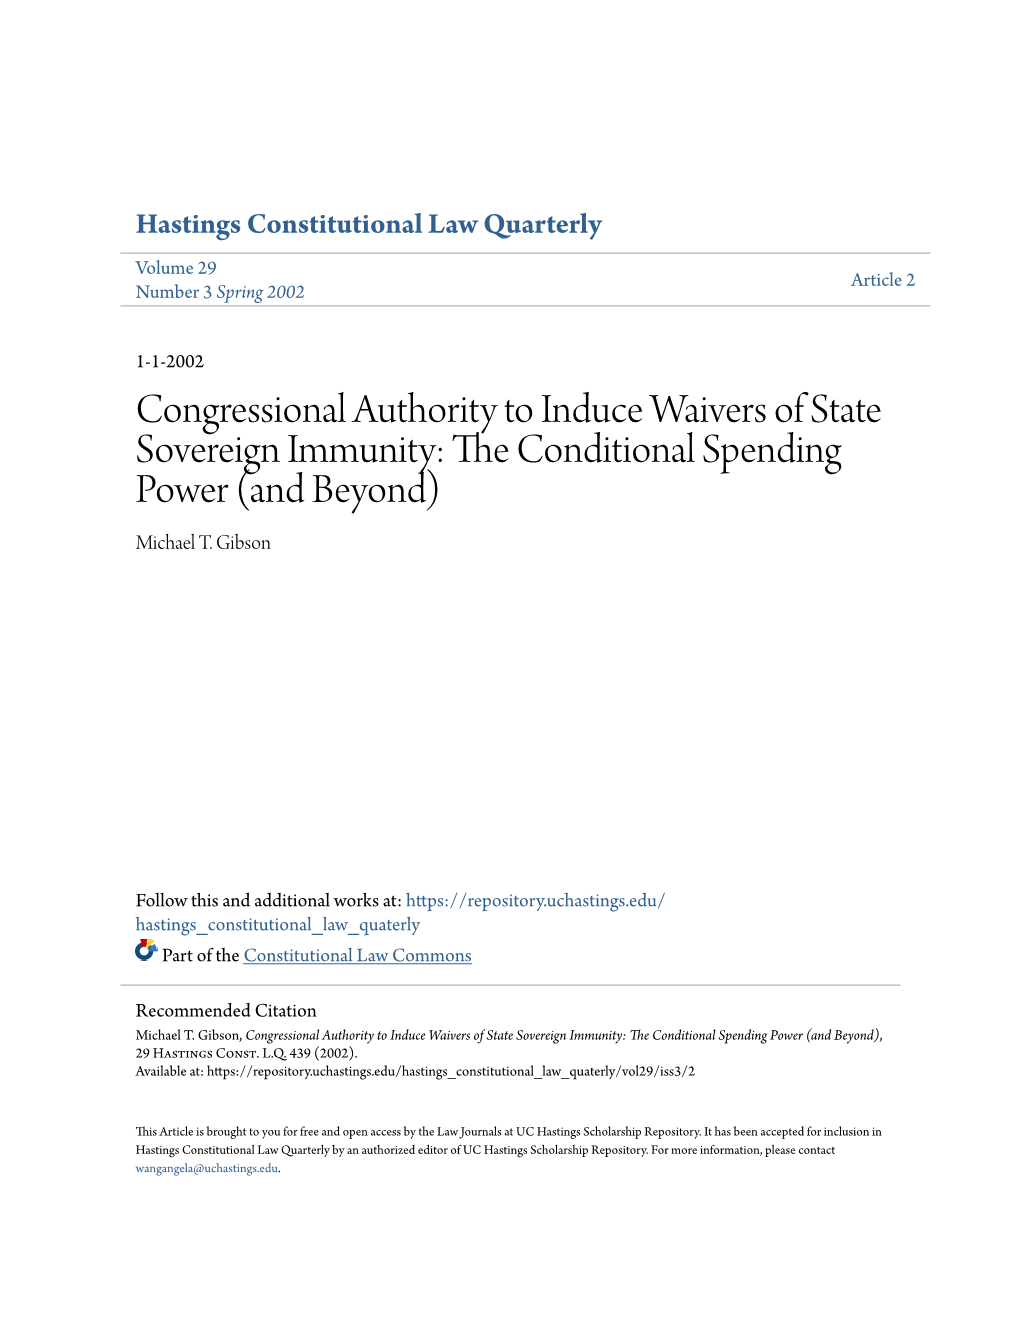 Congressional Authority to Induce Waivers of State Sovereign Immunity: the Onditc Ional Spending Power (And Beyond) Michael T